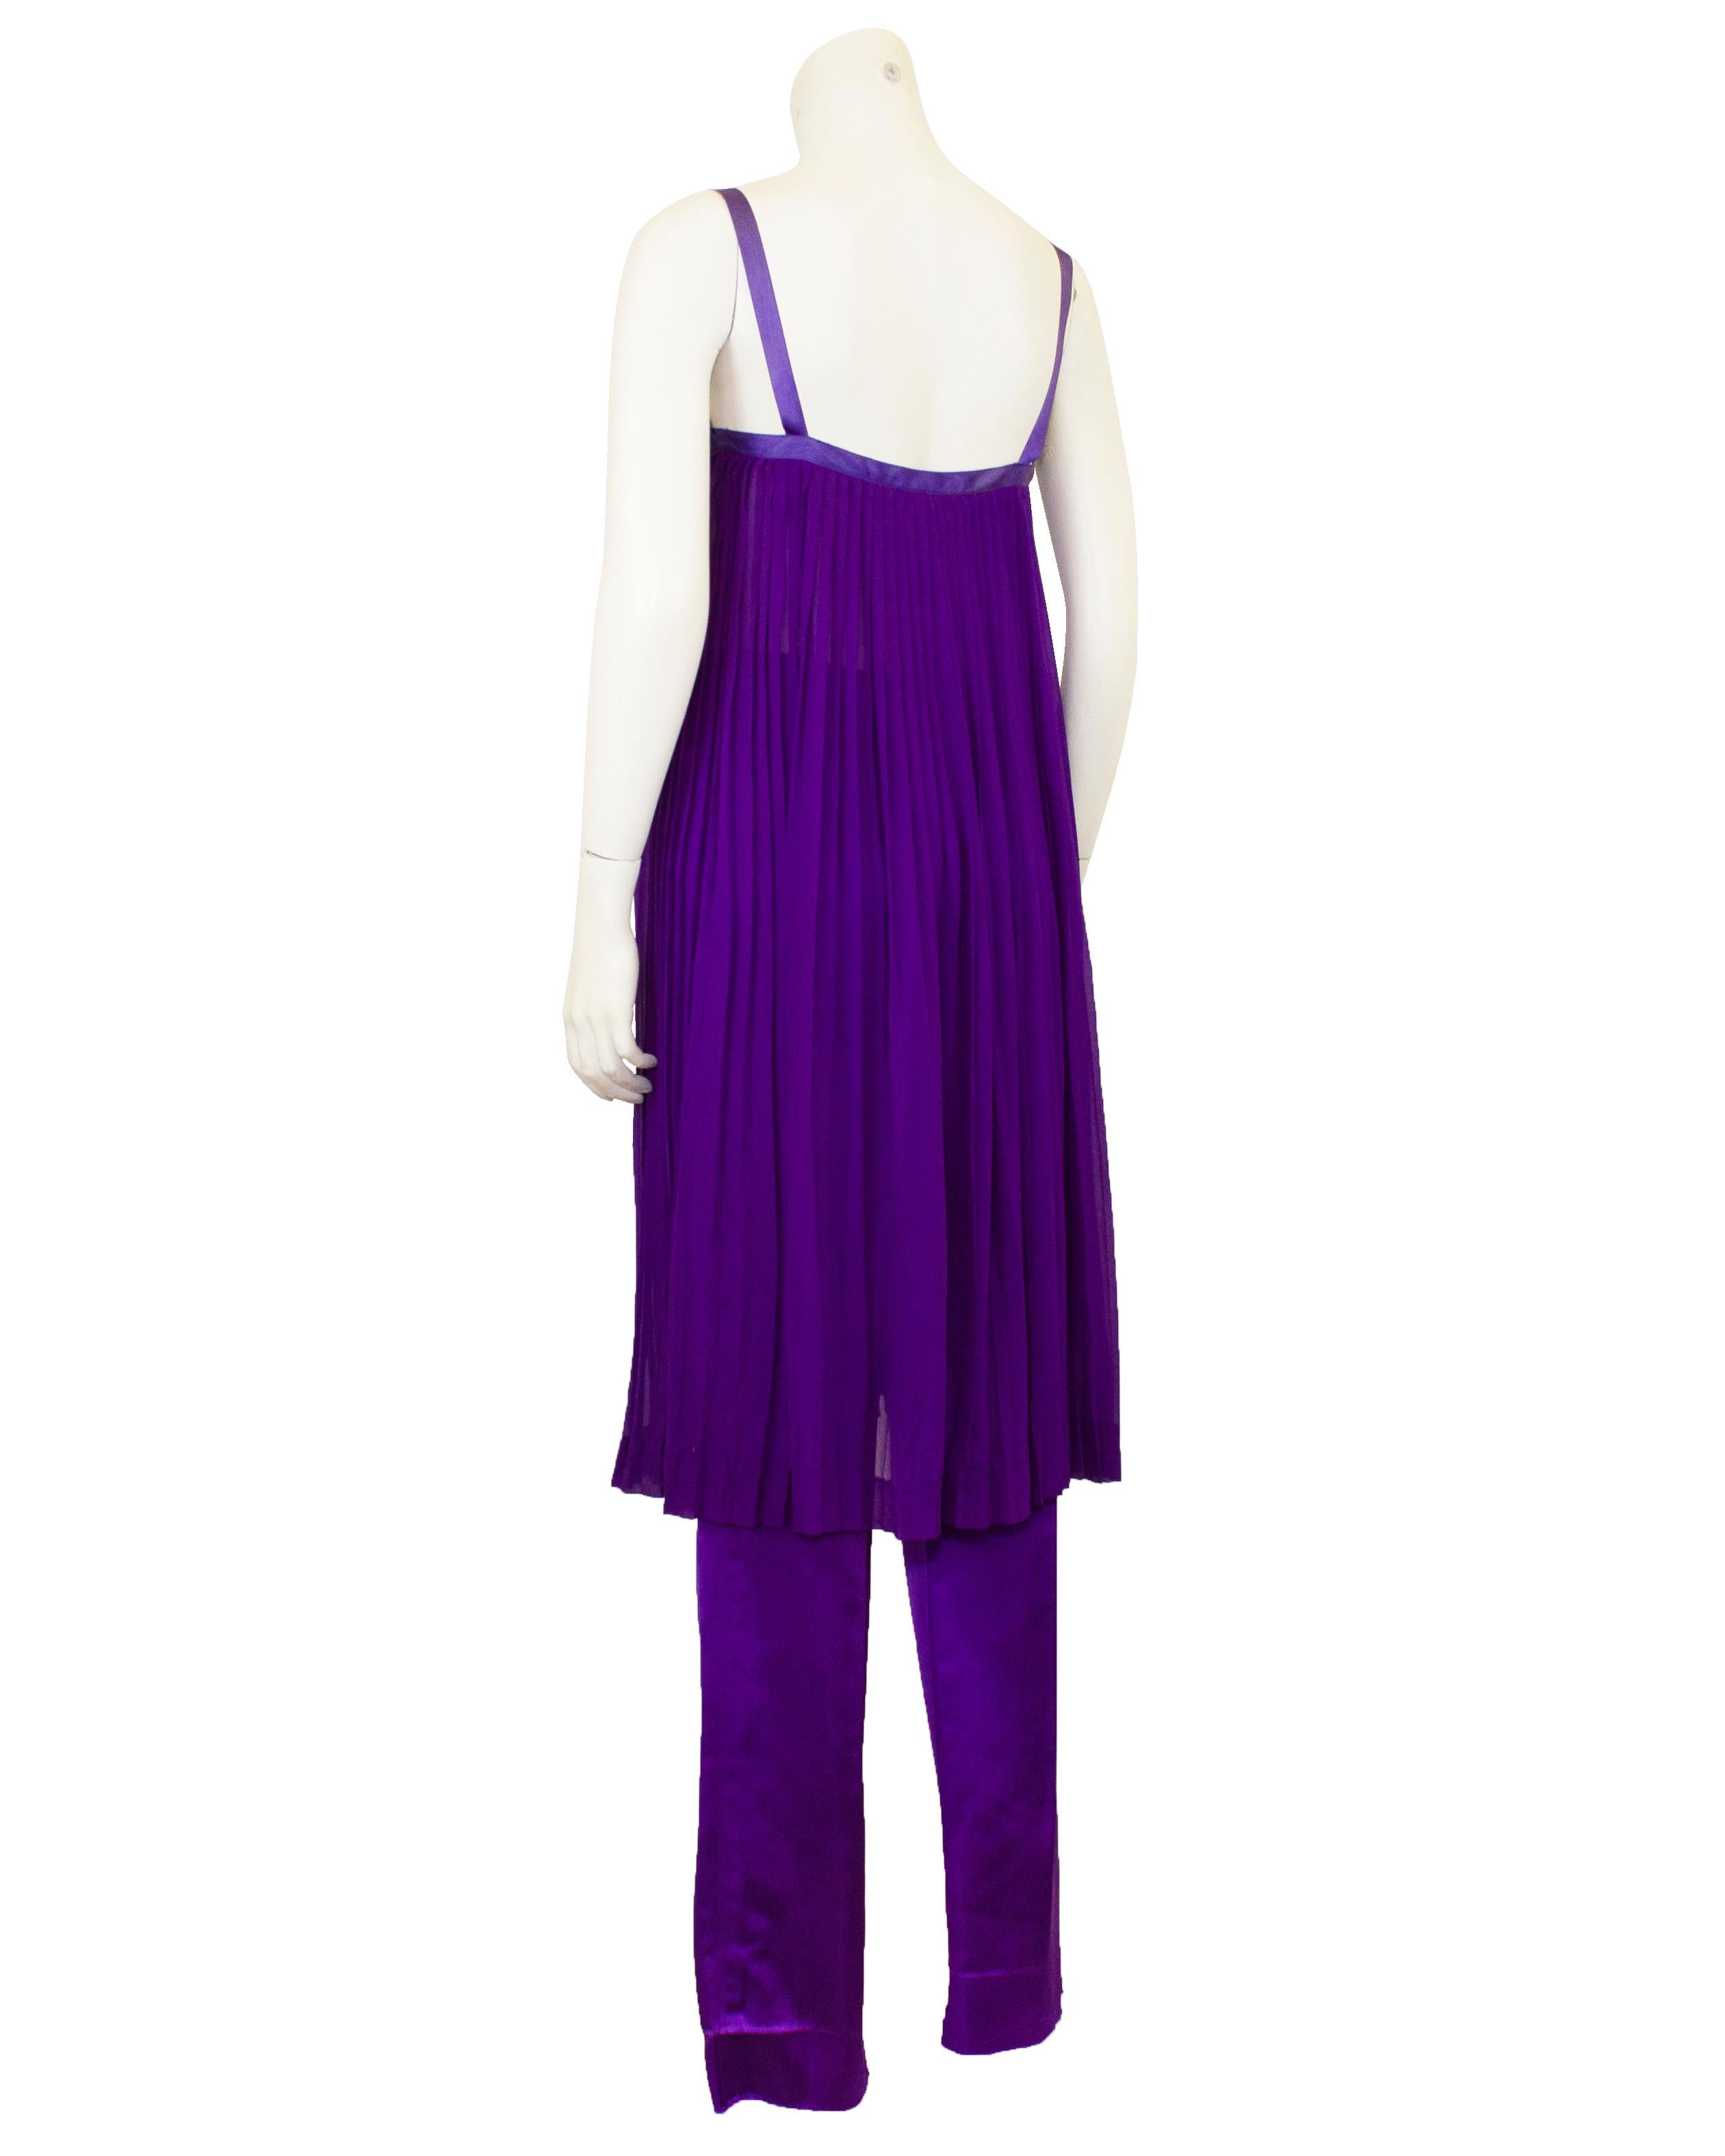 1978 Yves Saint Laurent Rive Gauche Purple Pleated and Silk Ensemble  In Good Condition For Sale In Toronto, Ontario